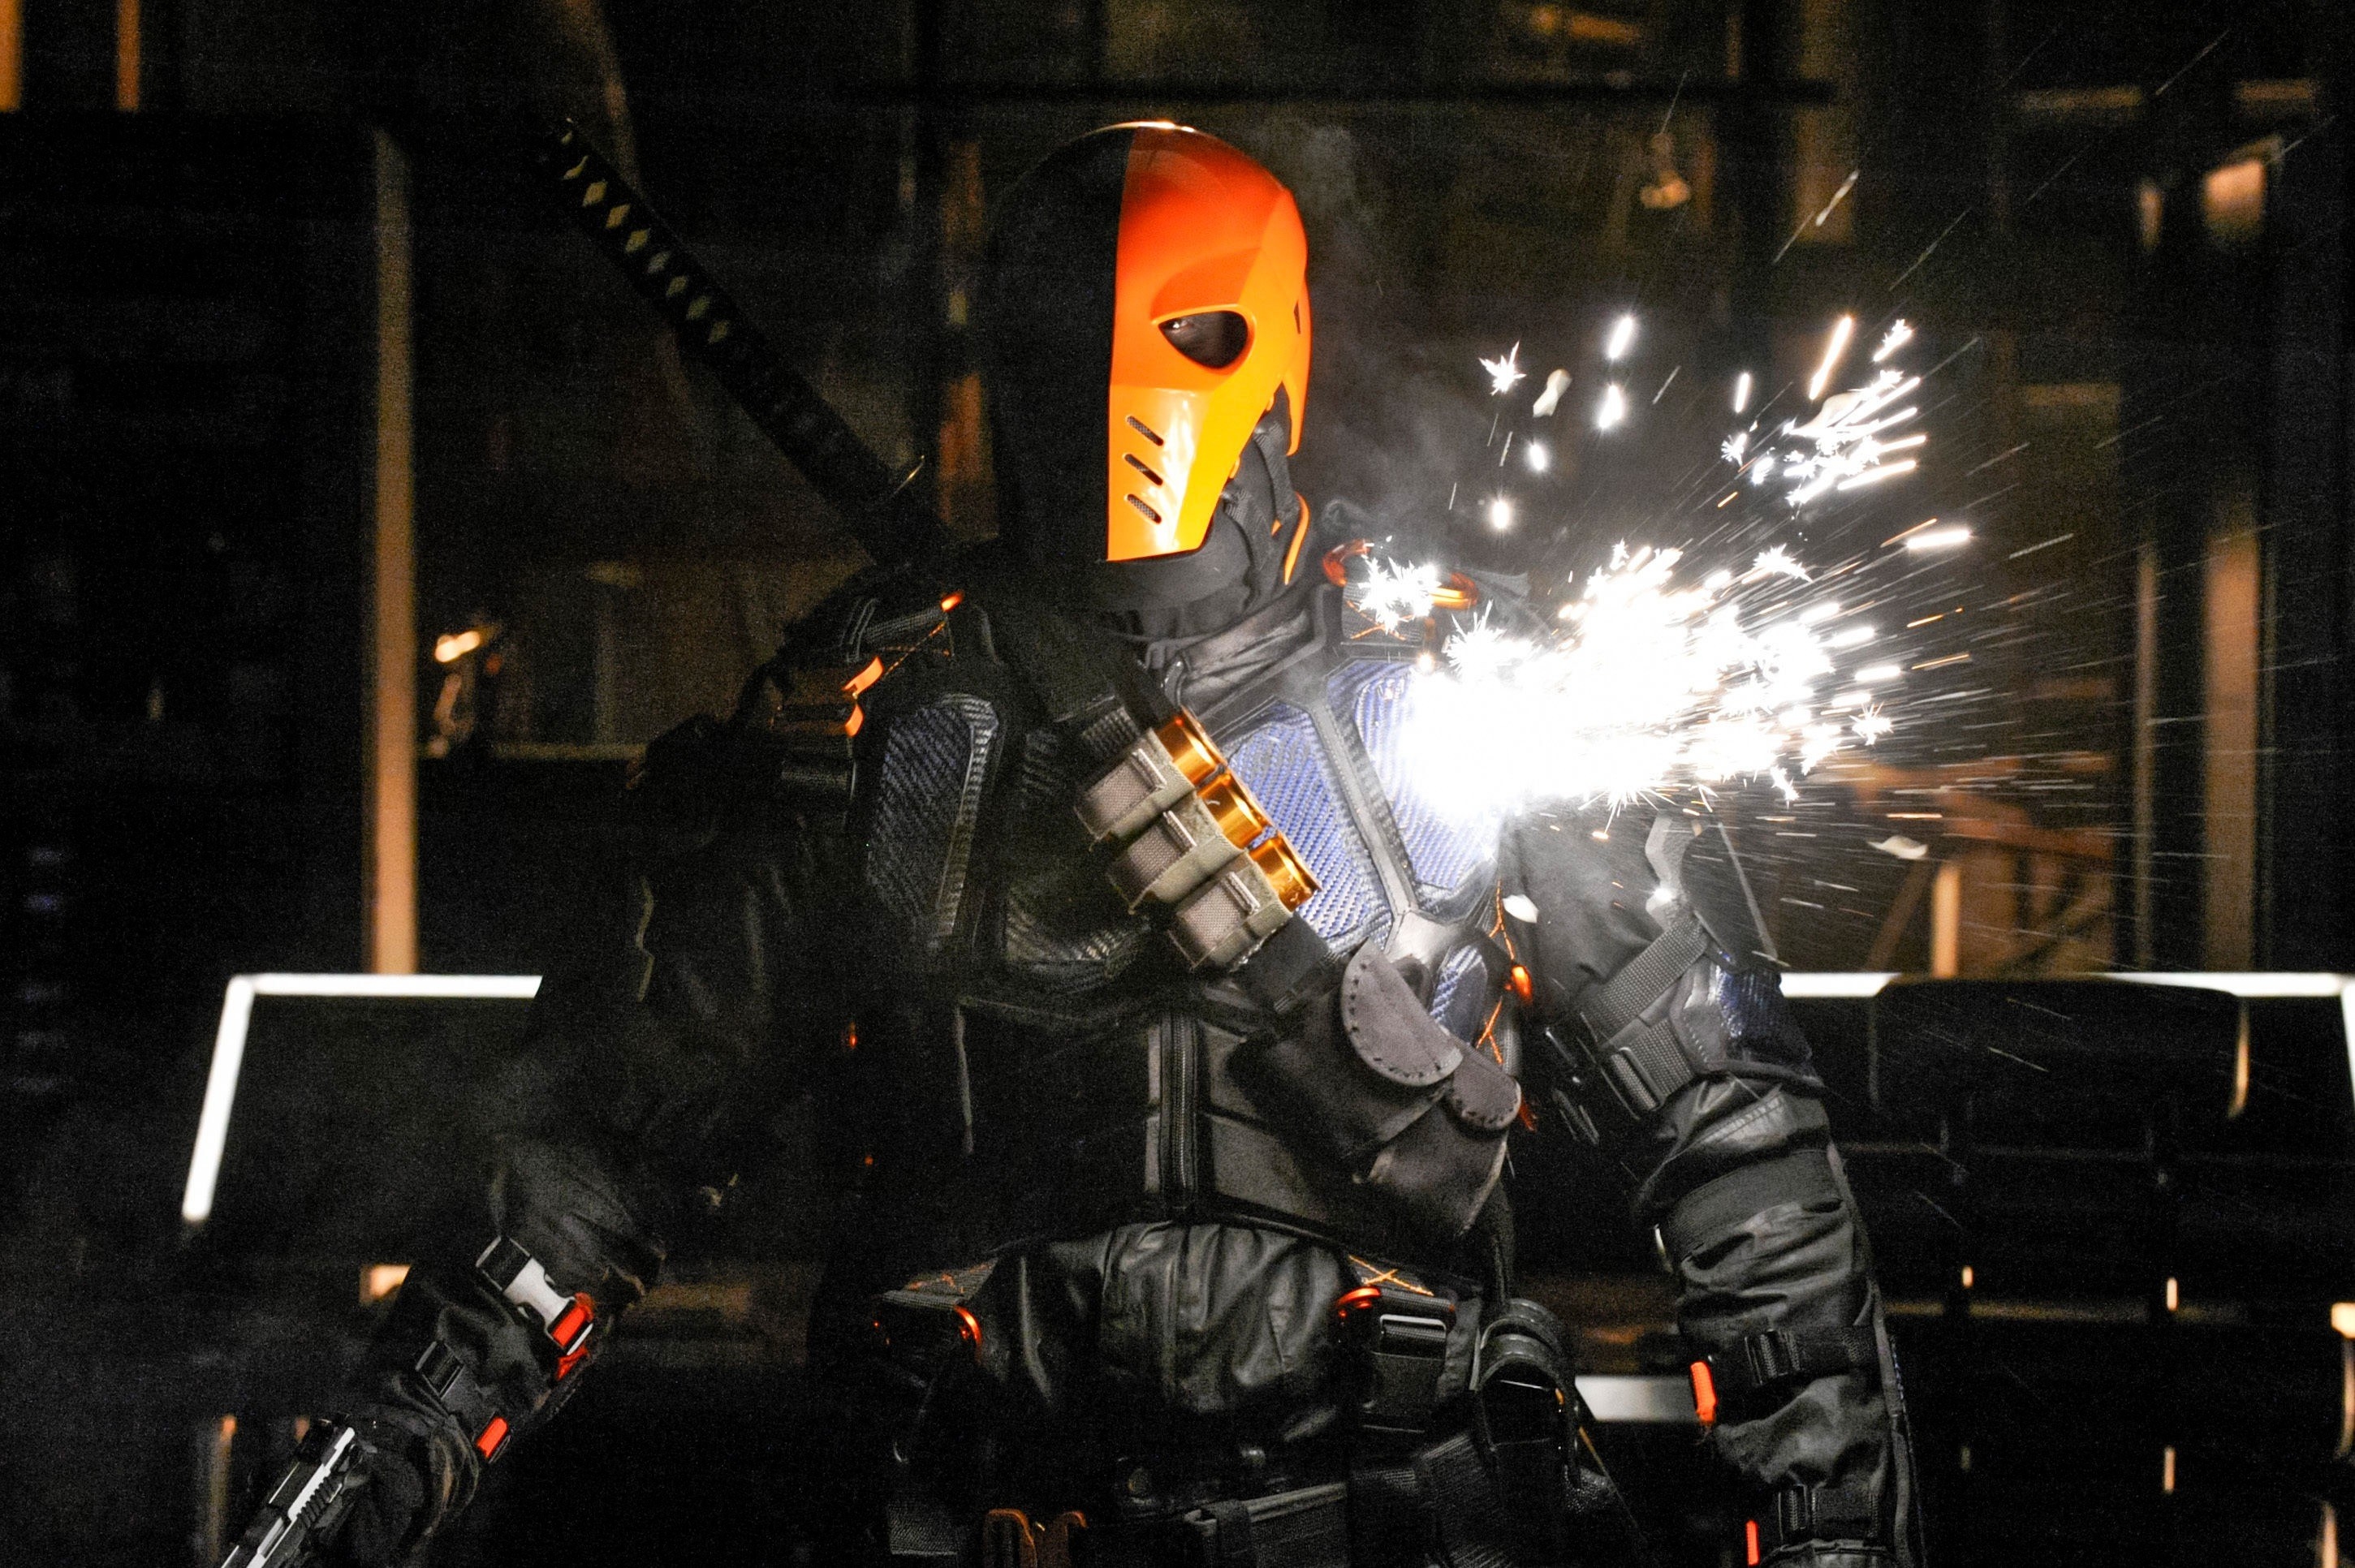 Deathstroke wearing a mask and weapons